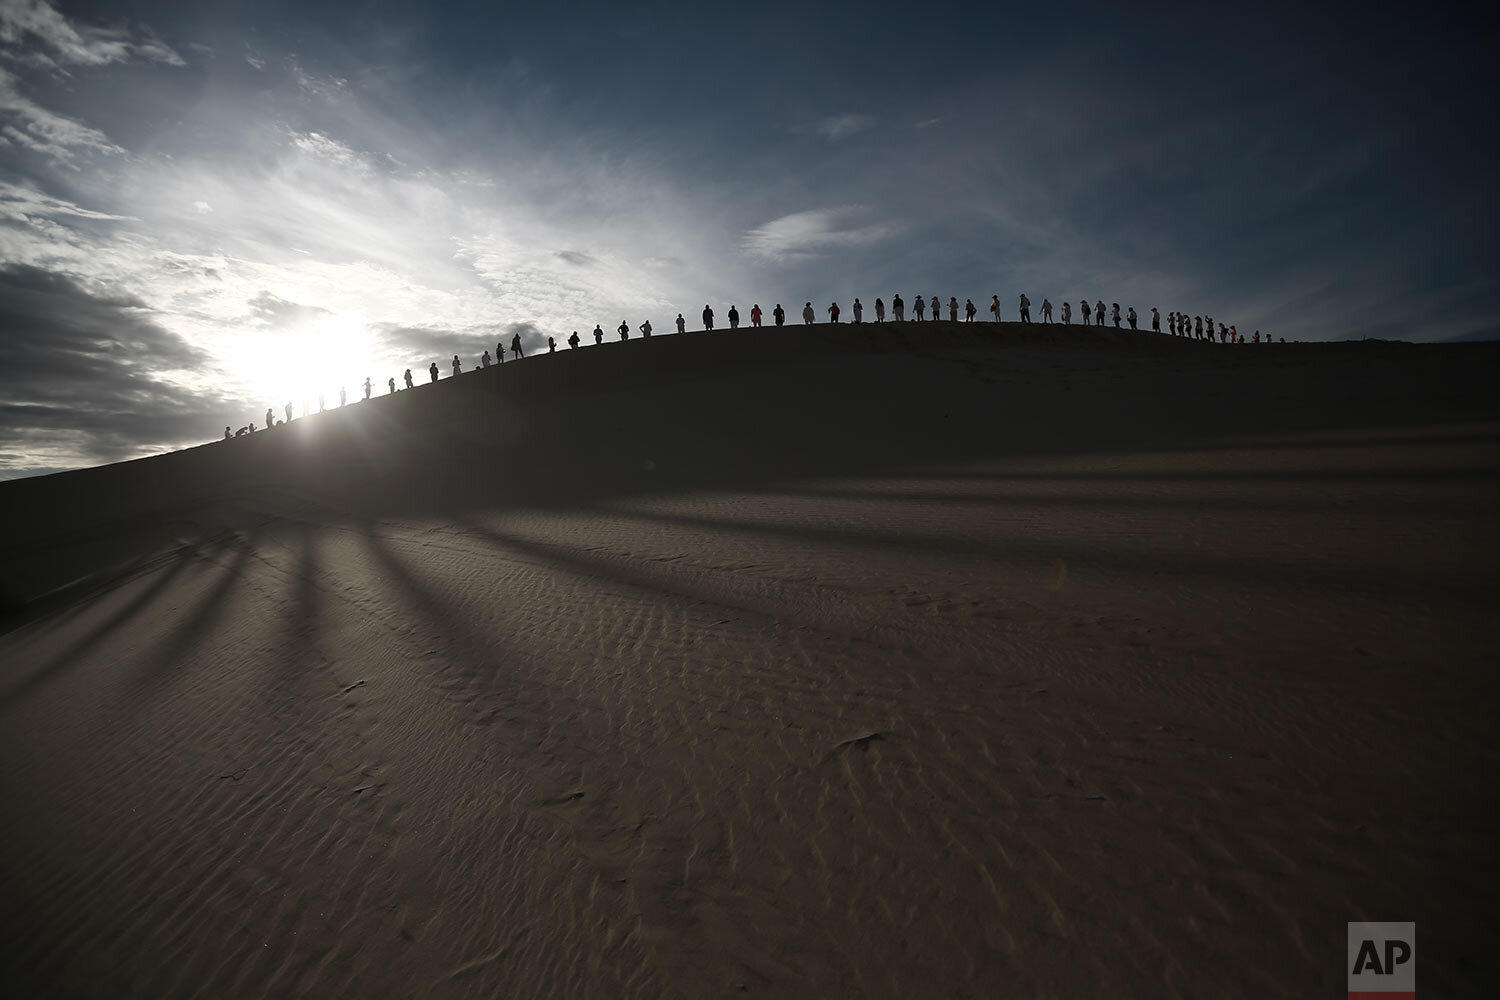  Yoga enthusiasts gather on the Samalayuca Dunes near Ciudad Juarez, Mexico for the 6th annual “Yoga in the Dunes” event⁠⁠, Saturday, July 3, 2021. Yoga studio organizers said this year’s event was held as a symbol of hope for those who have survived